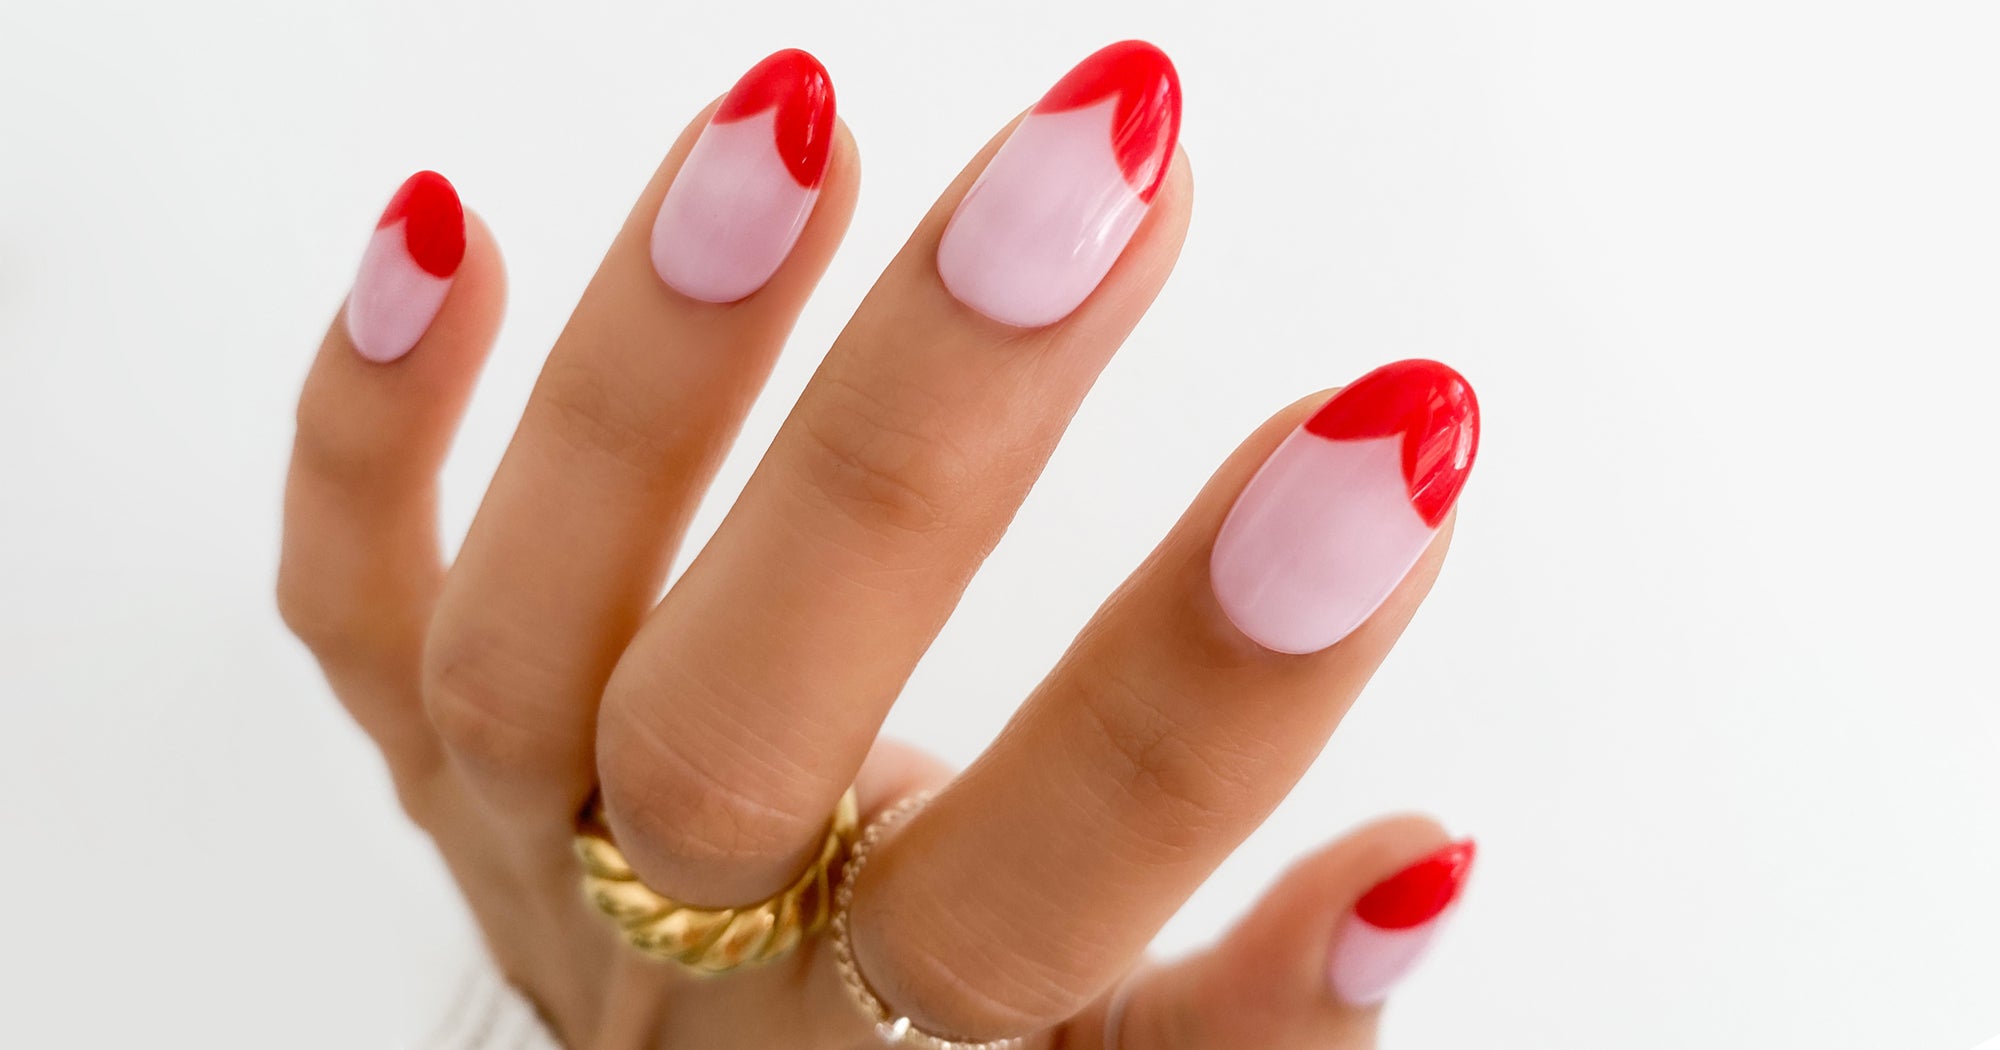 The almond-shaped French tip nail wants to feel like a coquette. - Runway